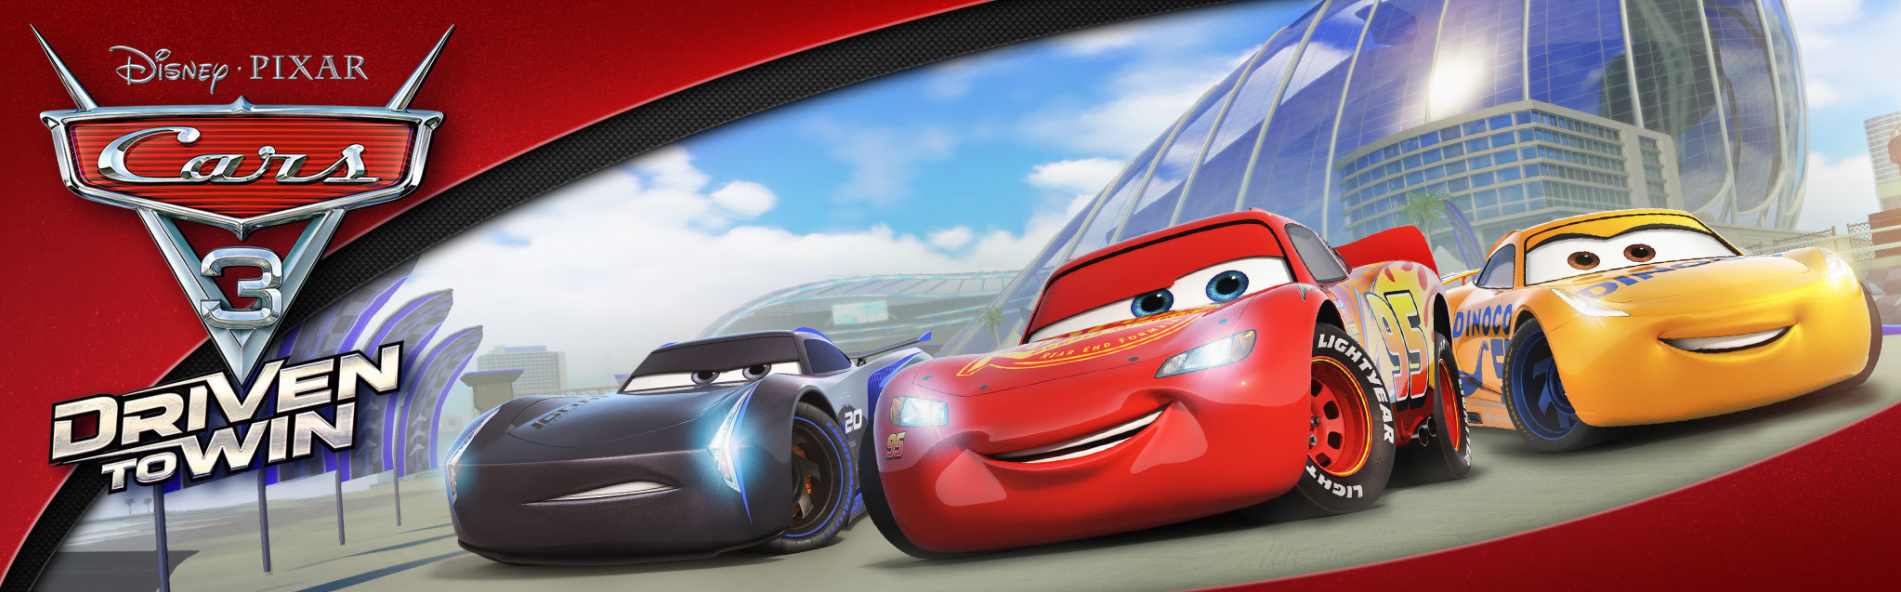 Console Game “Cars 3 : Driven To Win” Is Available Starting Today